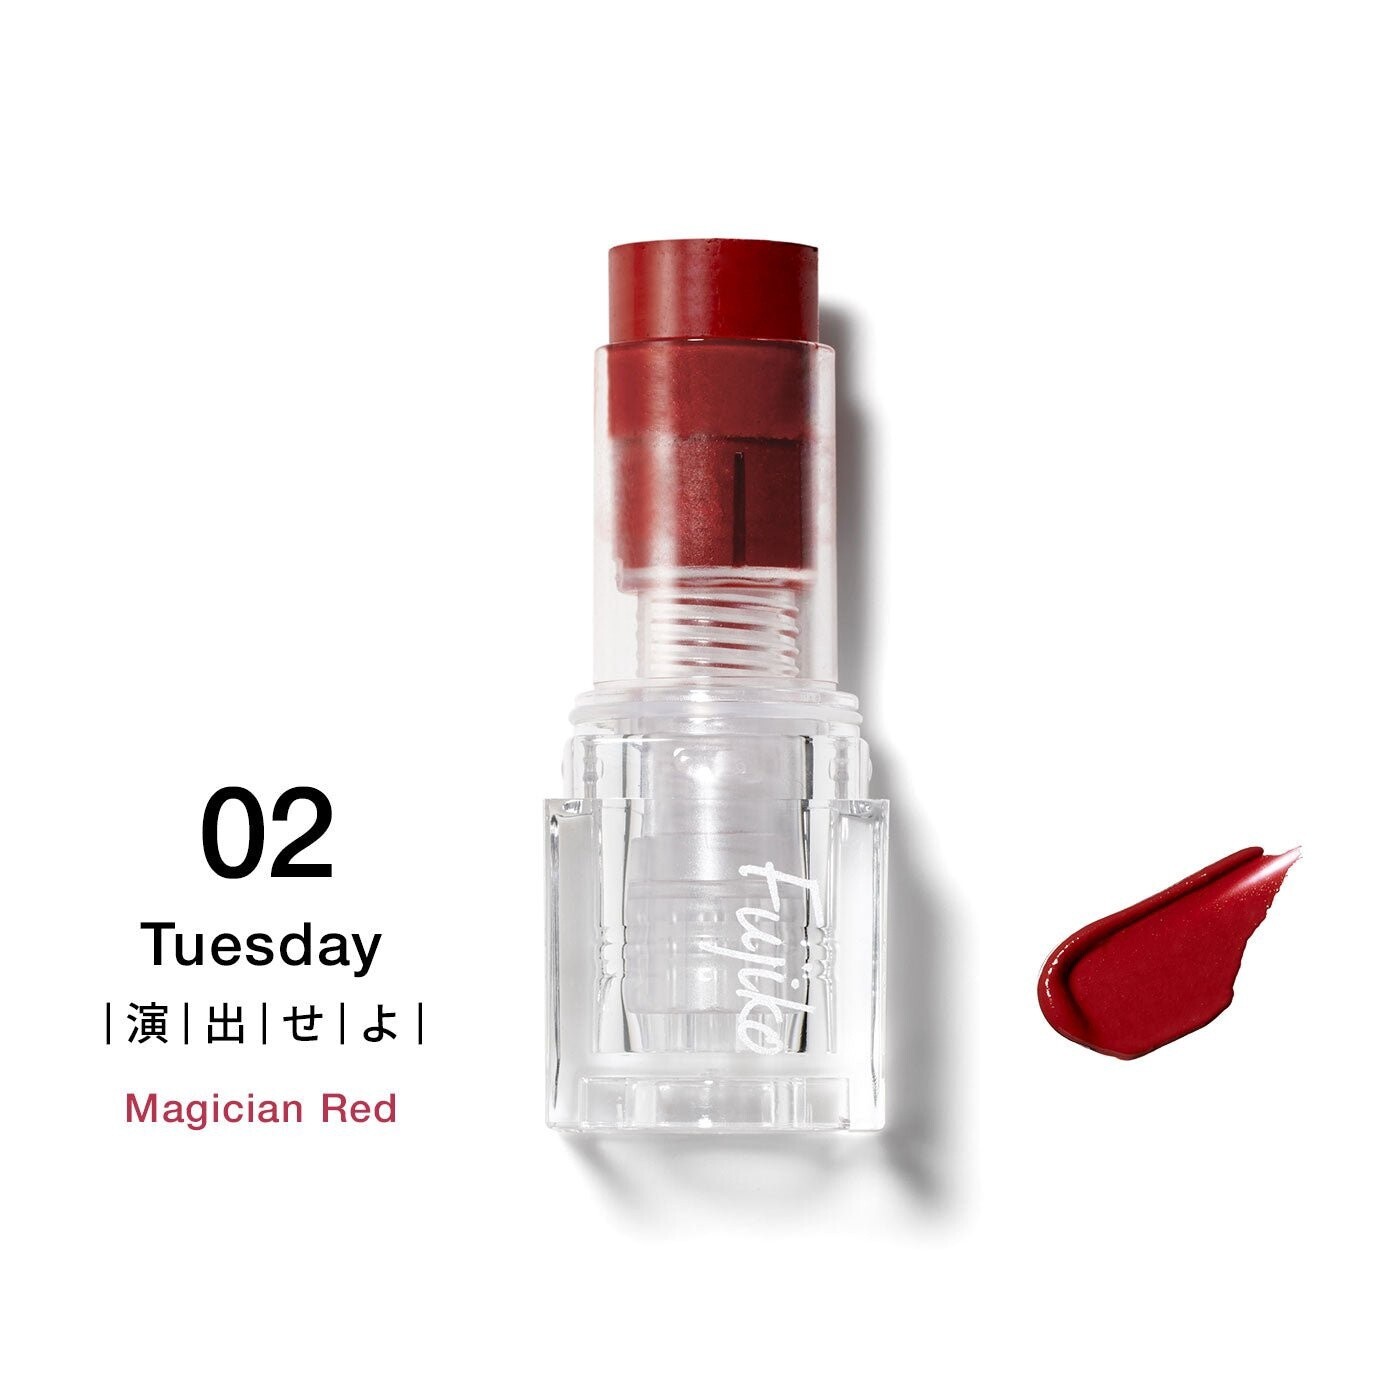 Fujiko Mini Watery Rouge, Color: 02 Tuesday (Magician Red)?